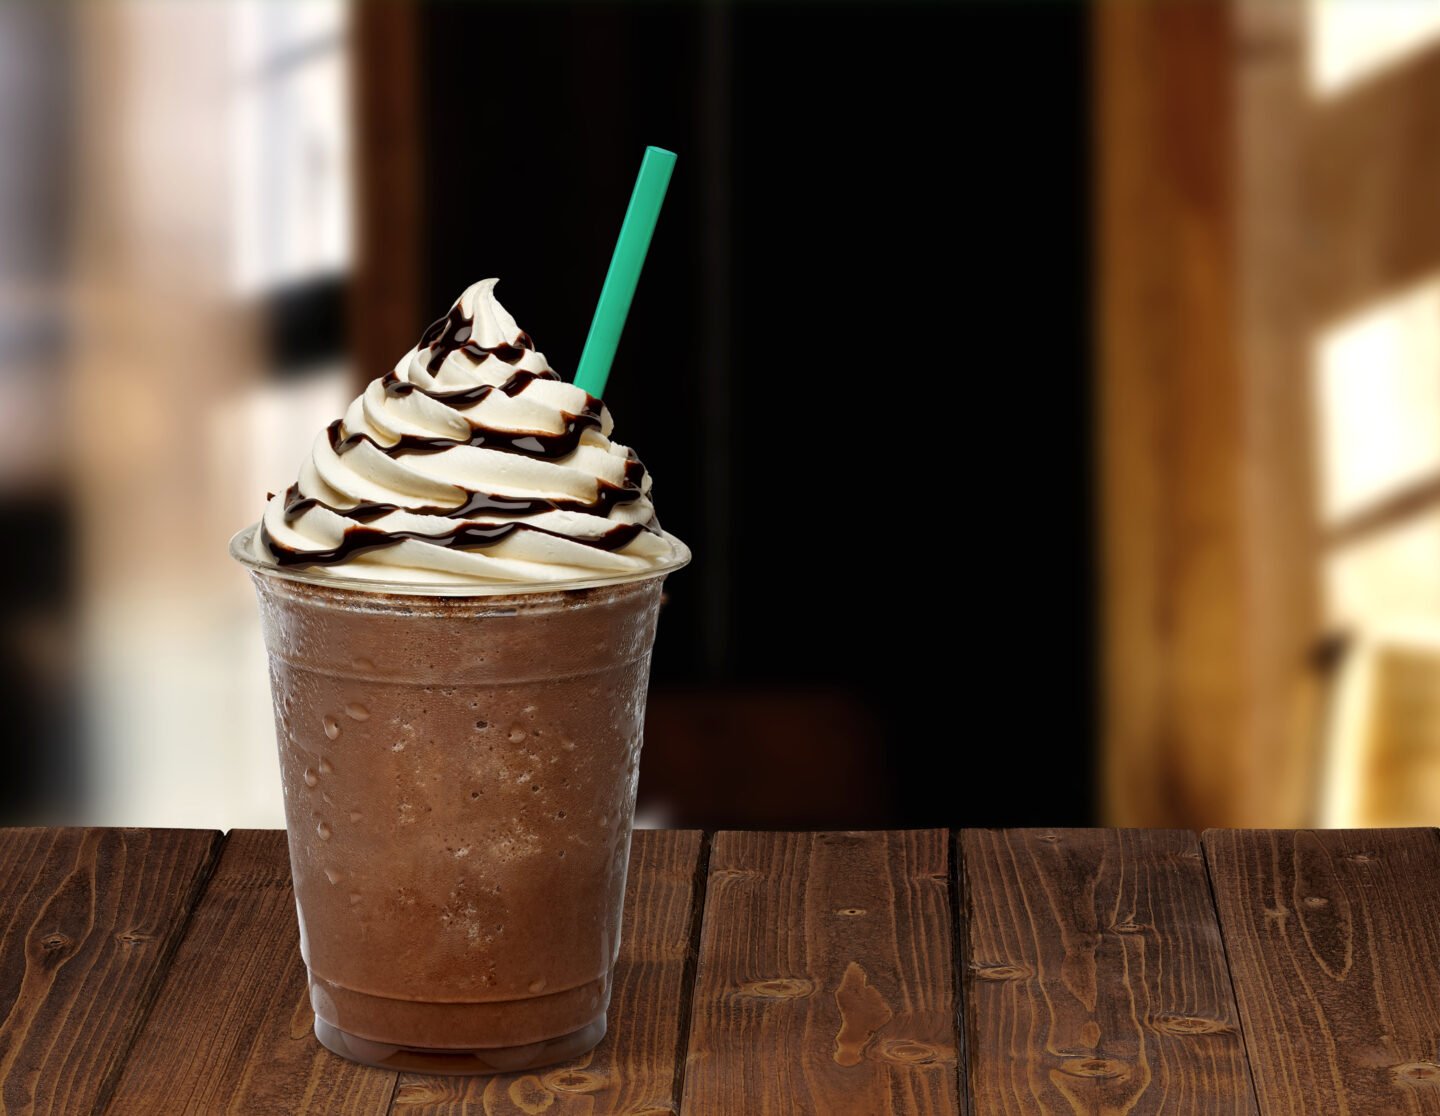 Frappuccino,In,Plastic,Takeaway,Or,To,Go,Cup,On,Wooden